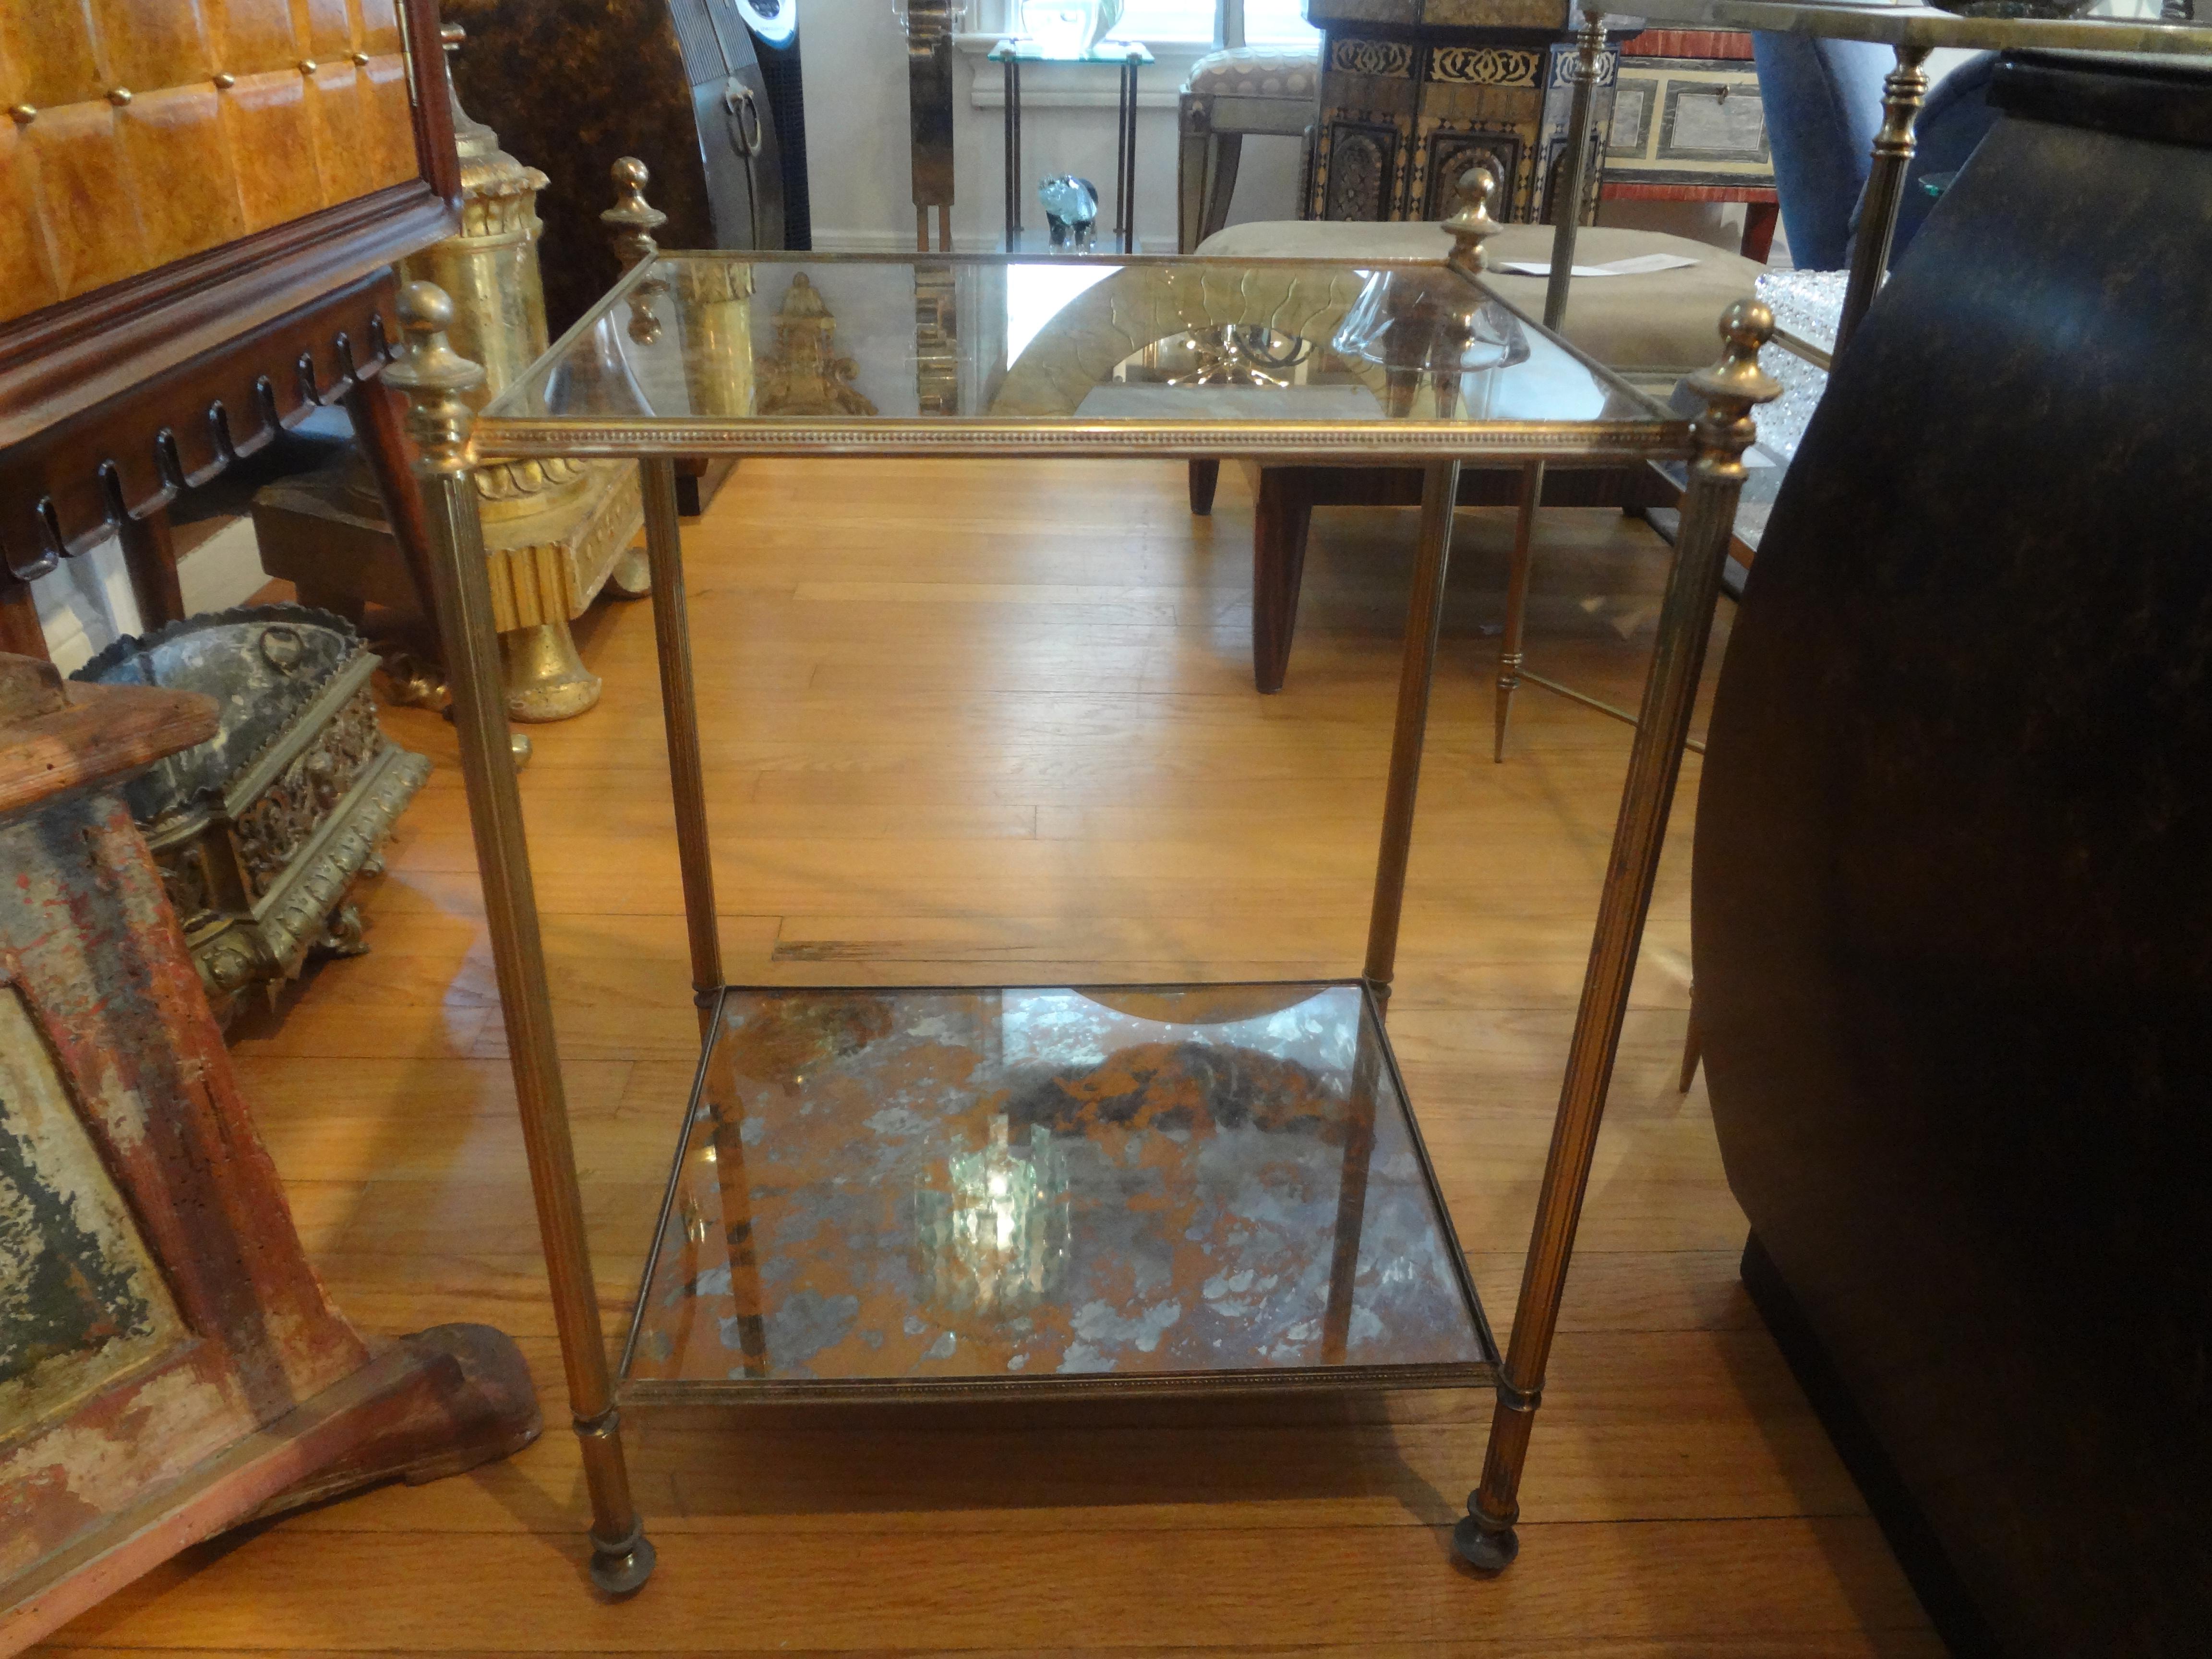 French Maison Jansen style bronze and mirrored table.
Stunning French Maison Jansen Louis XVI style bronze side table, drink table or gueridon with marbleized mirrored top. 
This versatile table can be used in a variety of spaces and easily moved